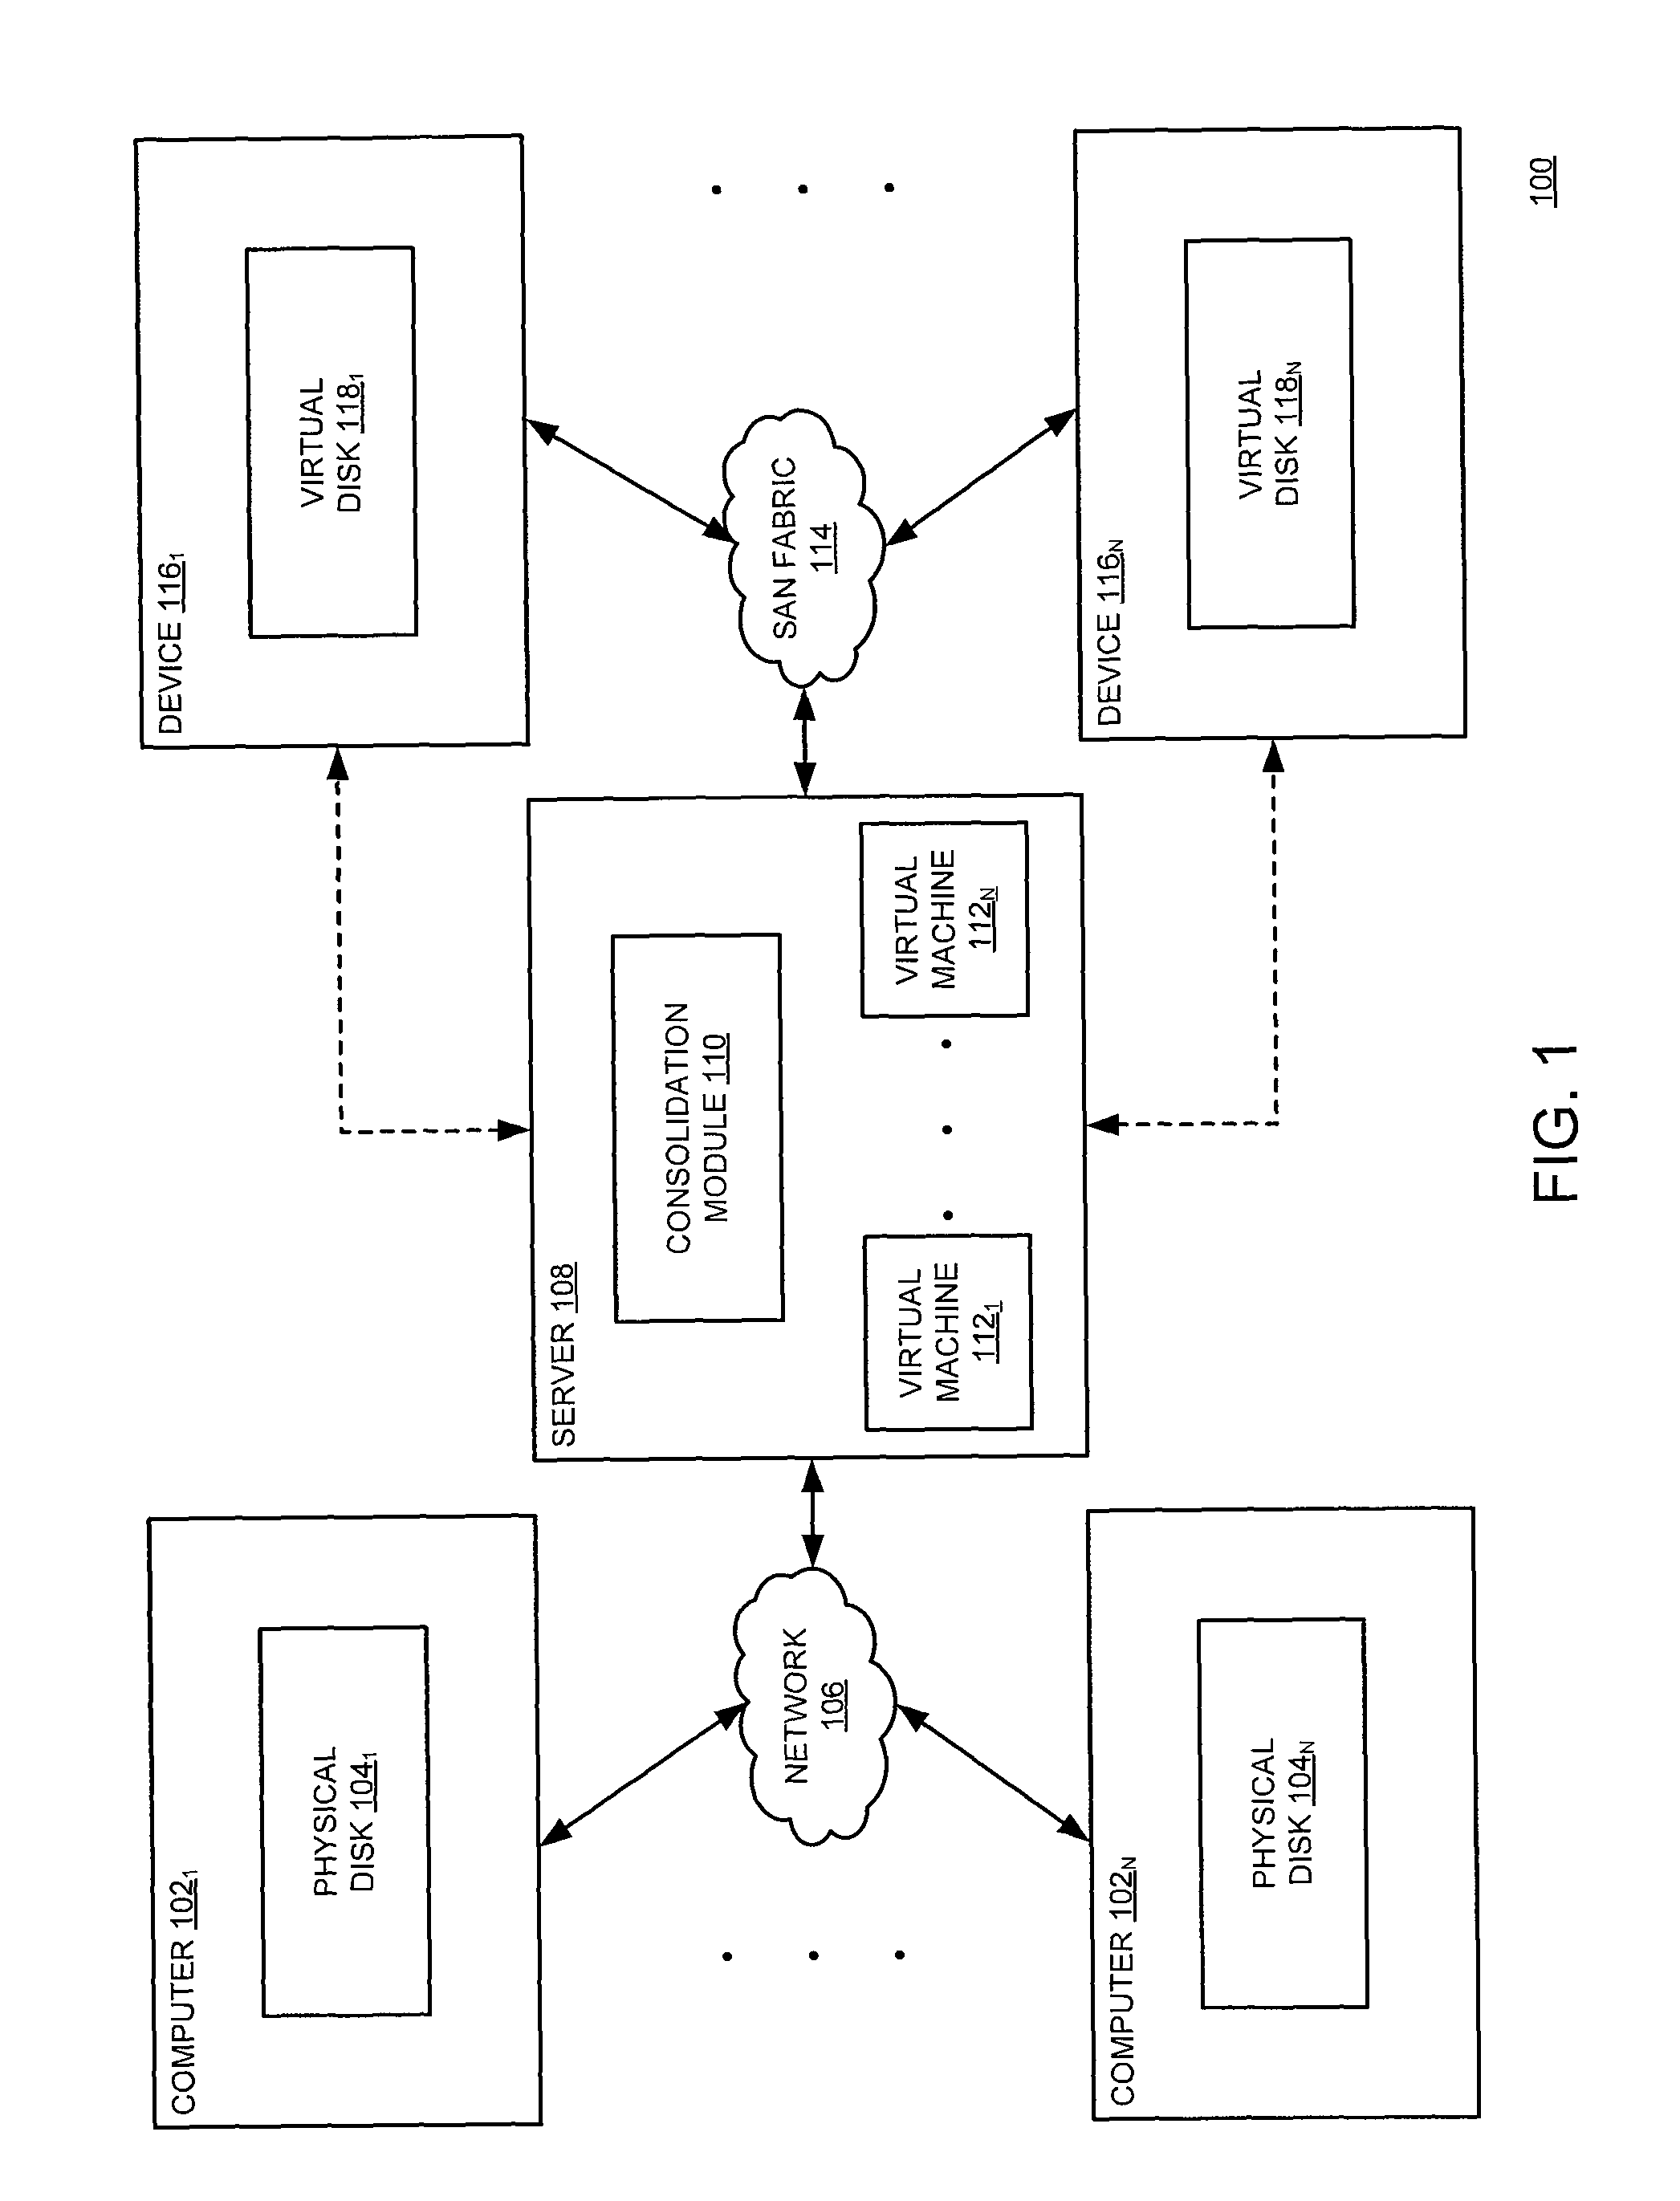 Method and apparatus for synchronizing a physical machine with a virtual machine while the virtual machine is operational